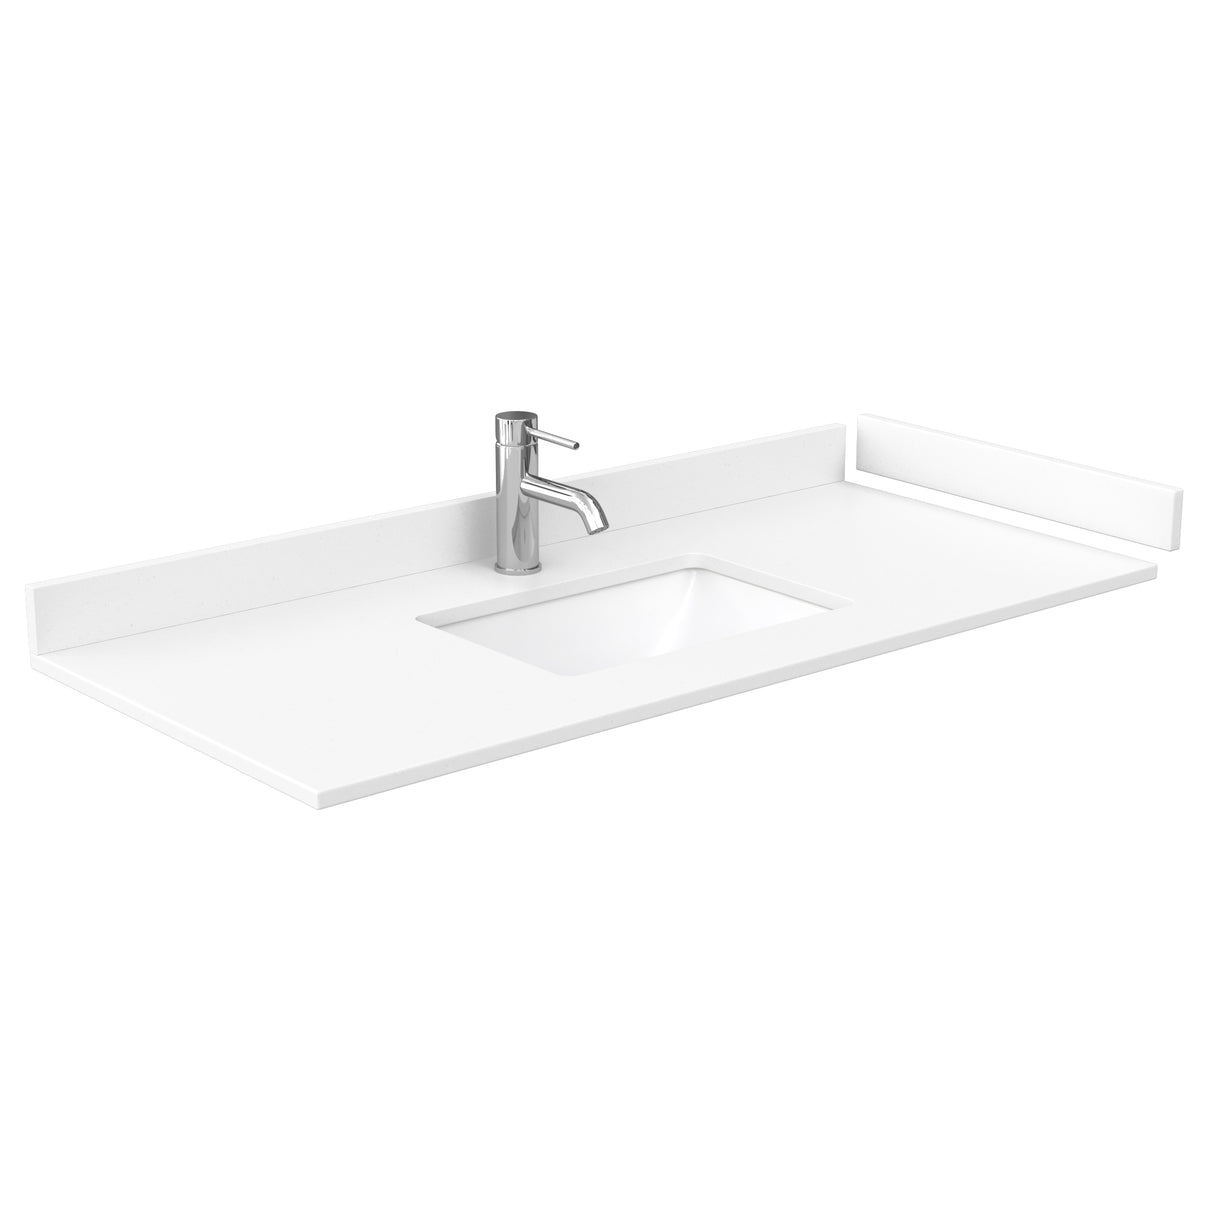 Strada 48 Inch Single Bathroom Vanity in White White Cultured Marble Countertop Undermount Square Sink Brushed Nickel Trim 46 Inch Mirror